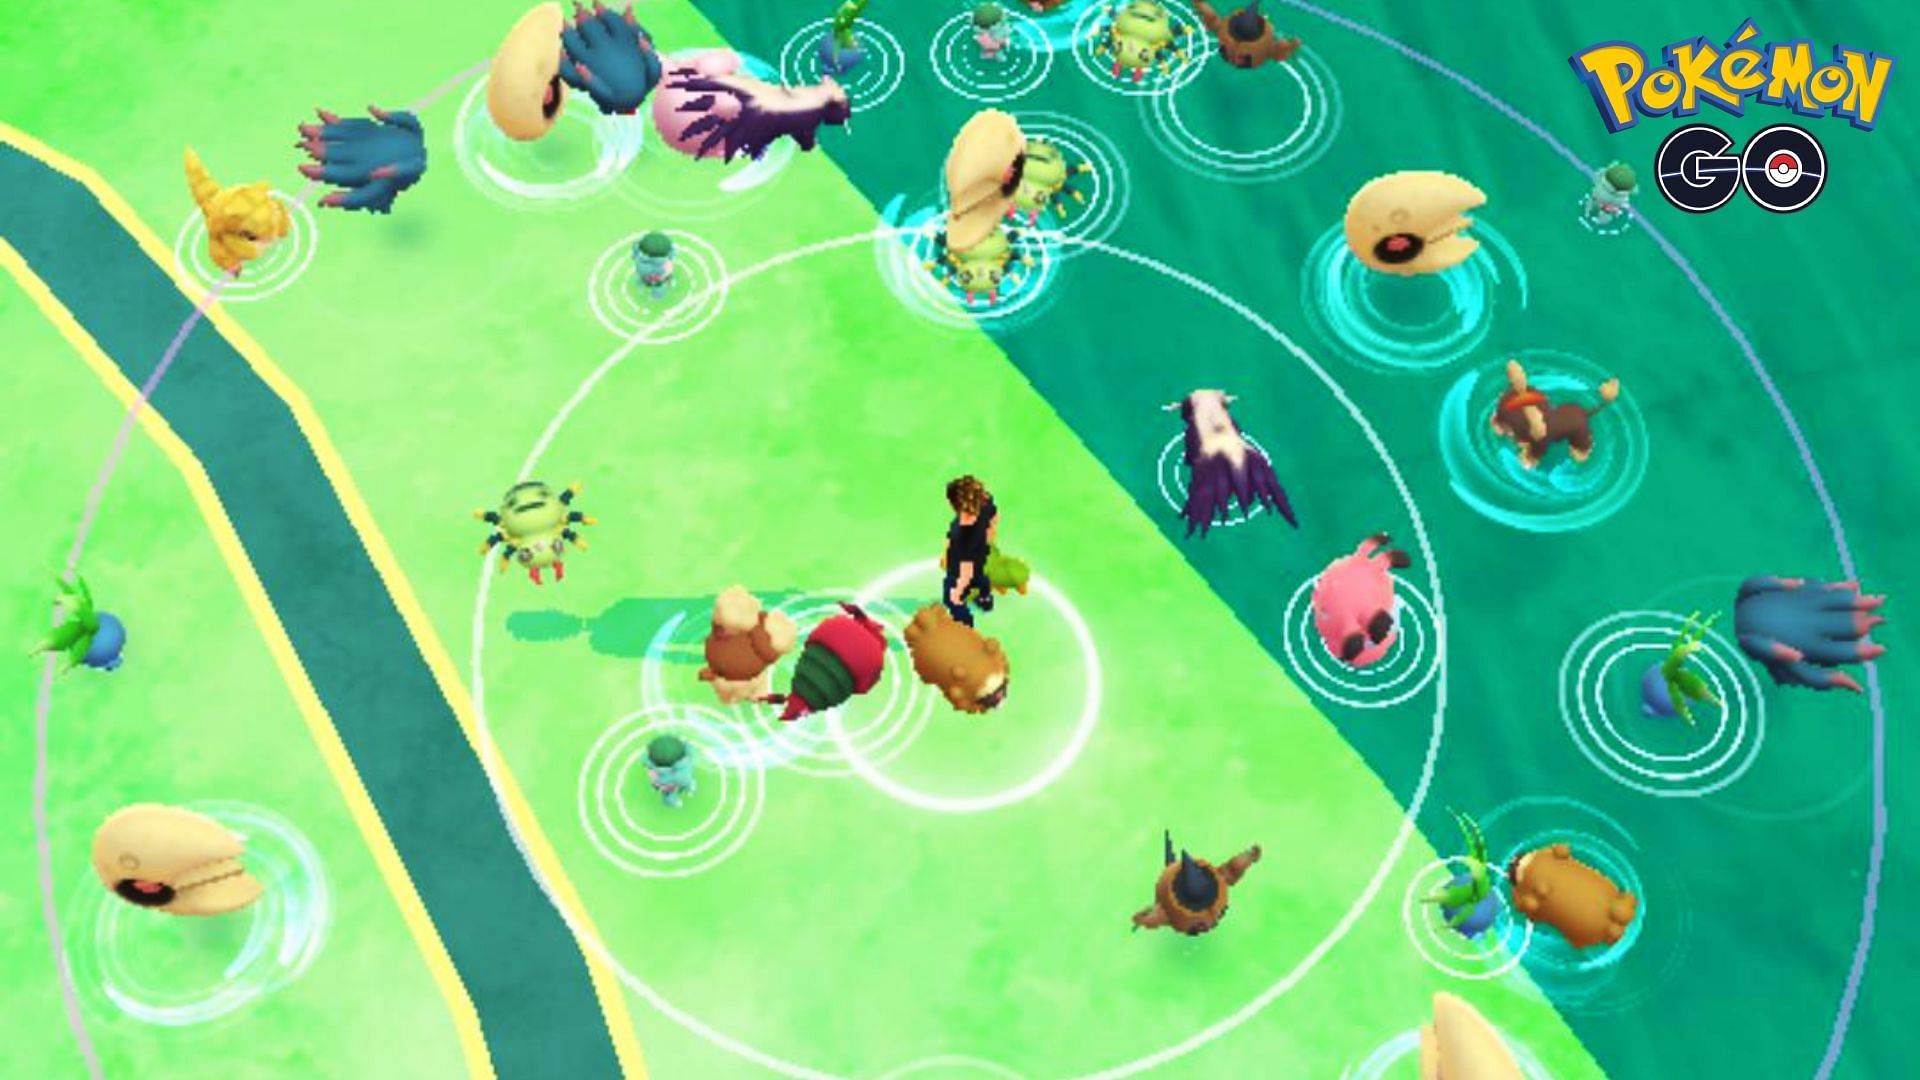 Many different pokemon spawning around the player model on the Pokemon GO map.